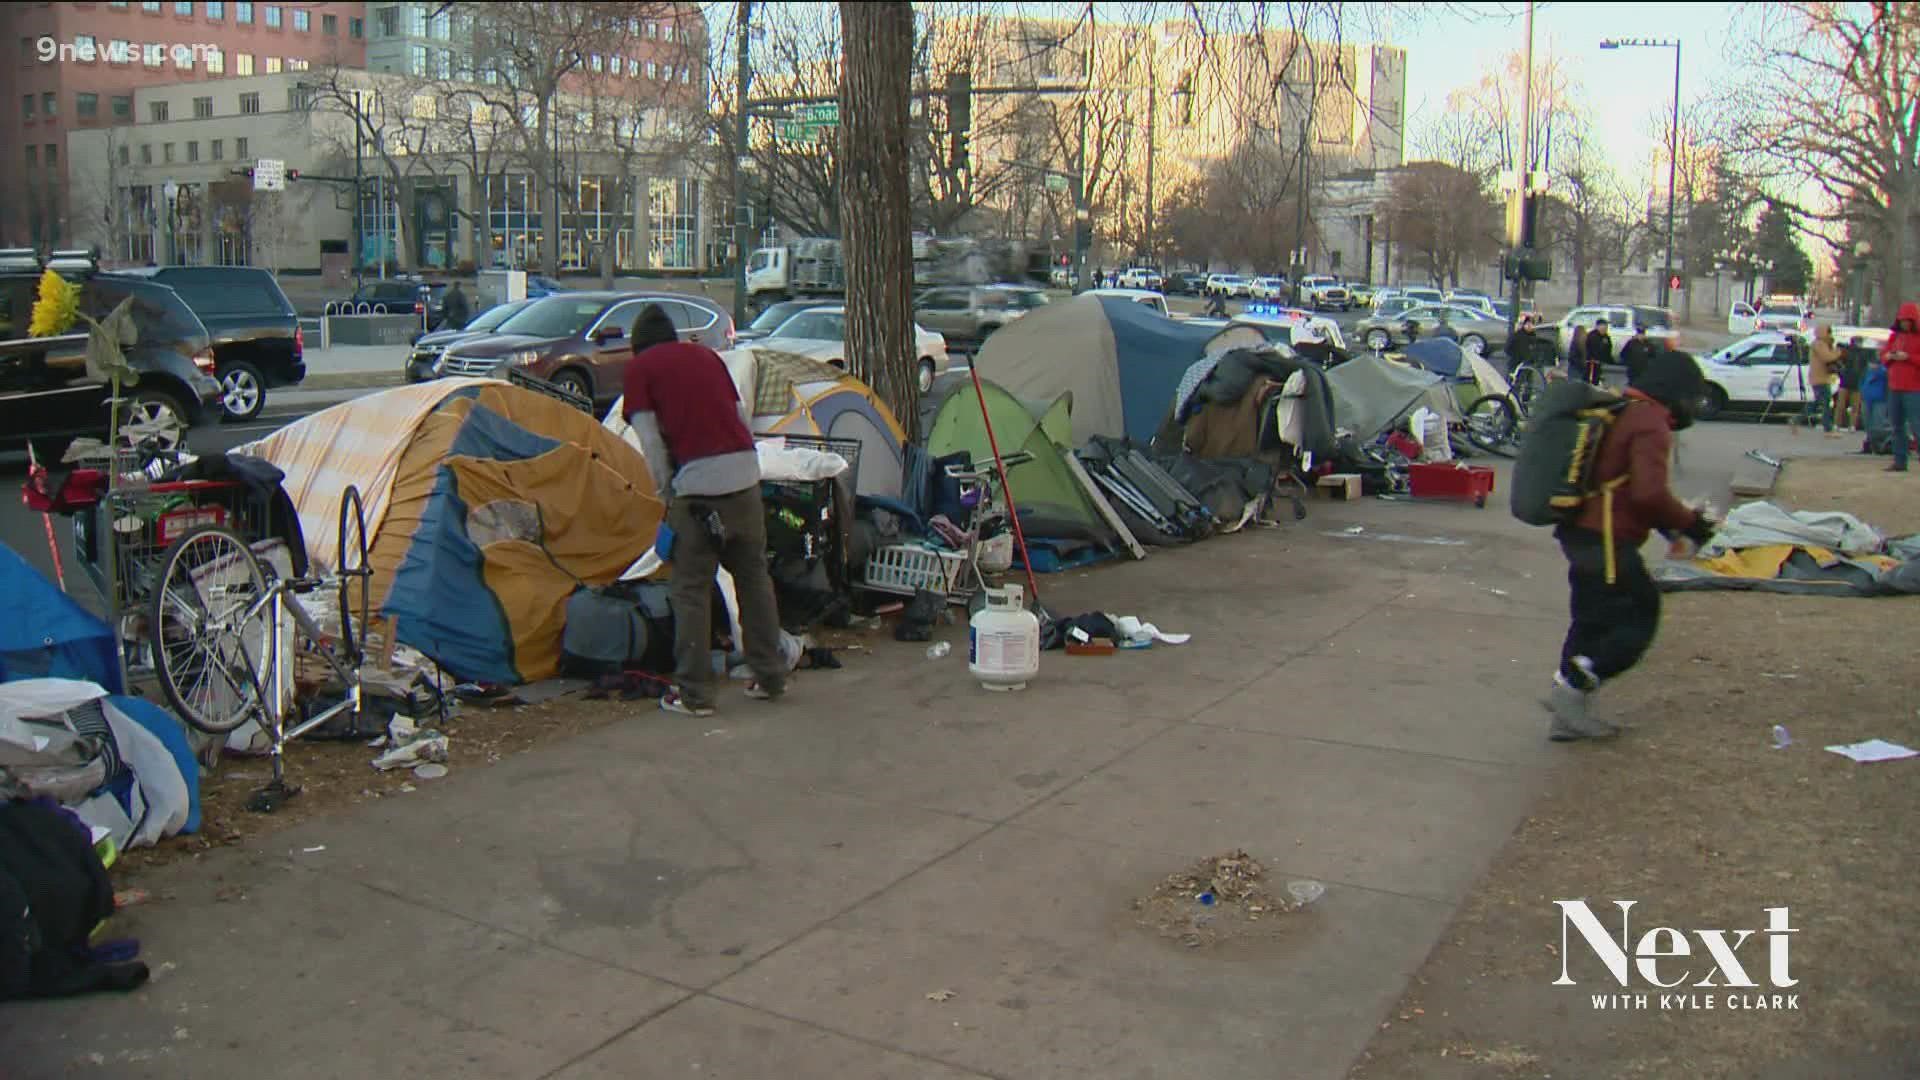 denver-touts-success-with-helping-people-out-of-homelessness-9news